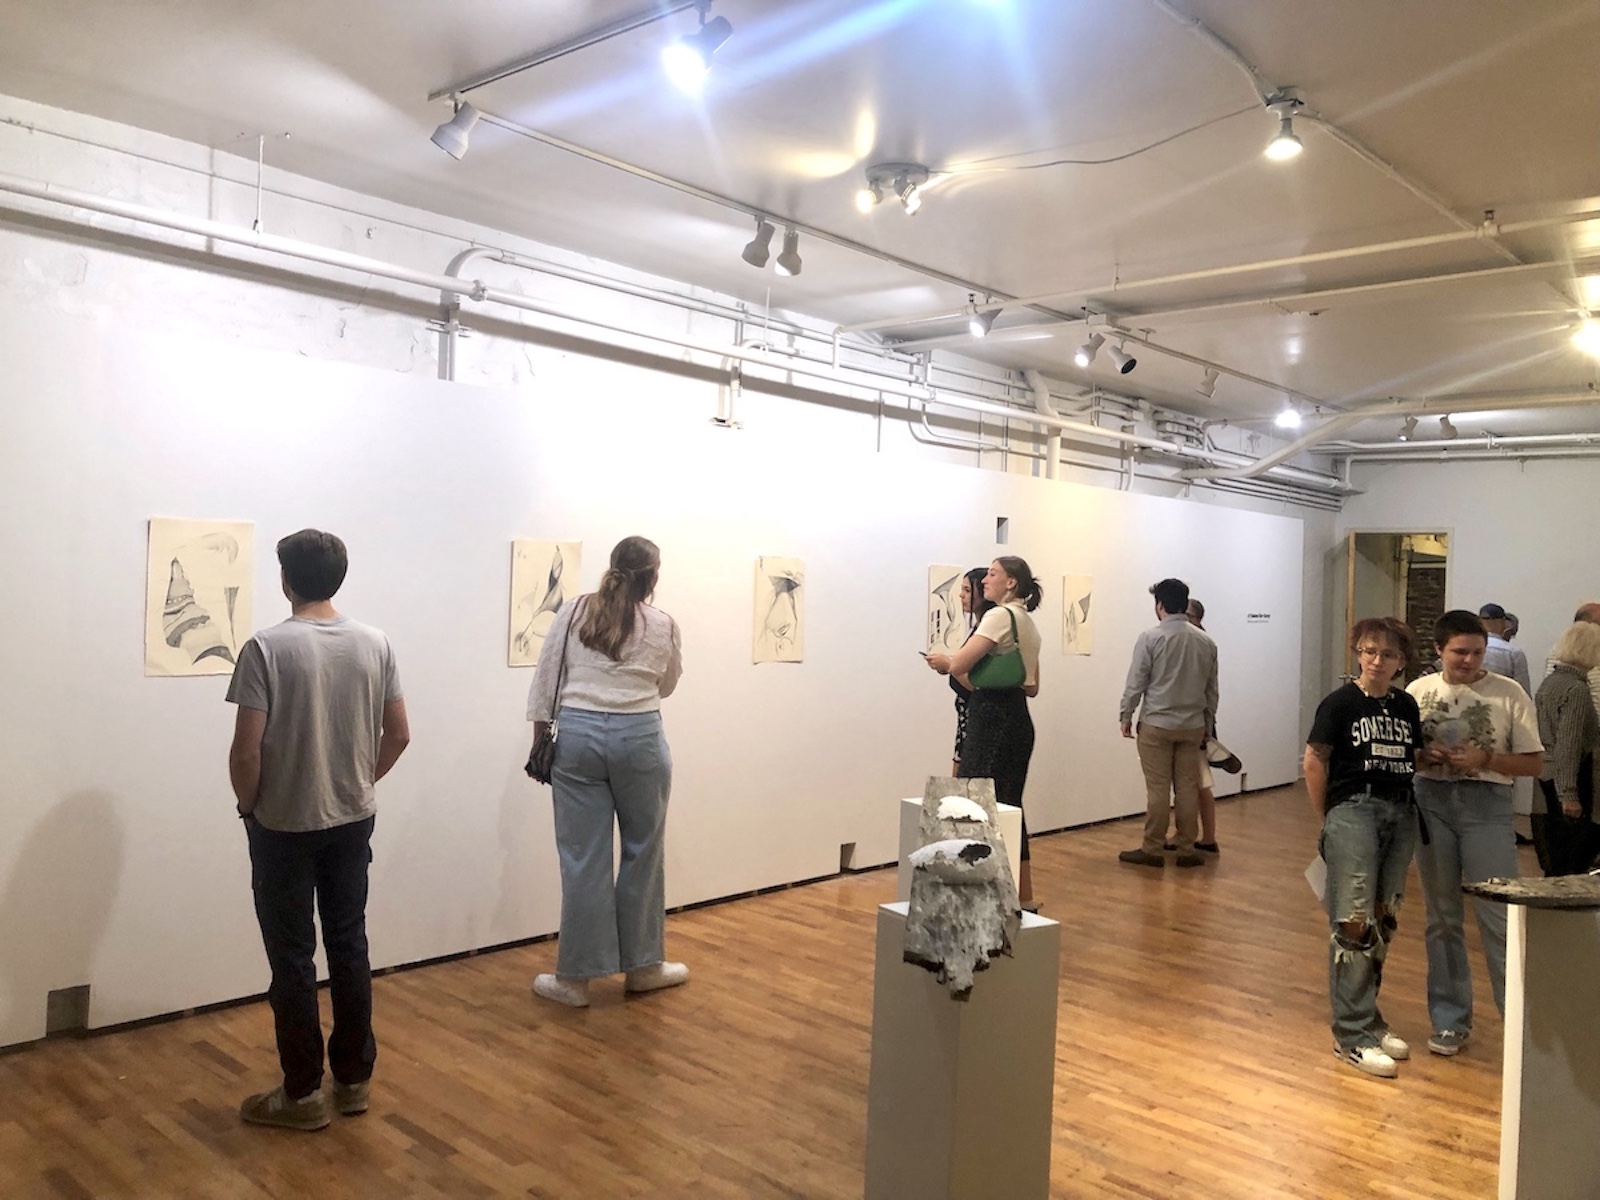 Patrons looking at the printmaking artworks on the wall